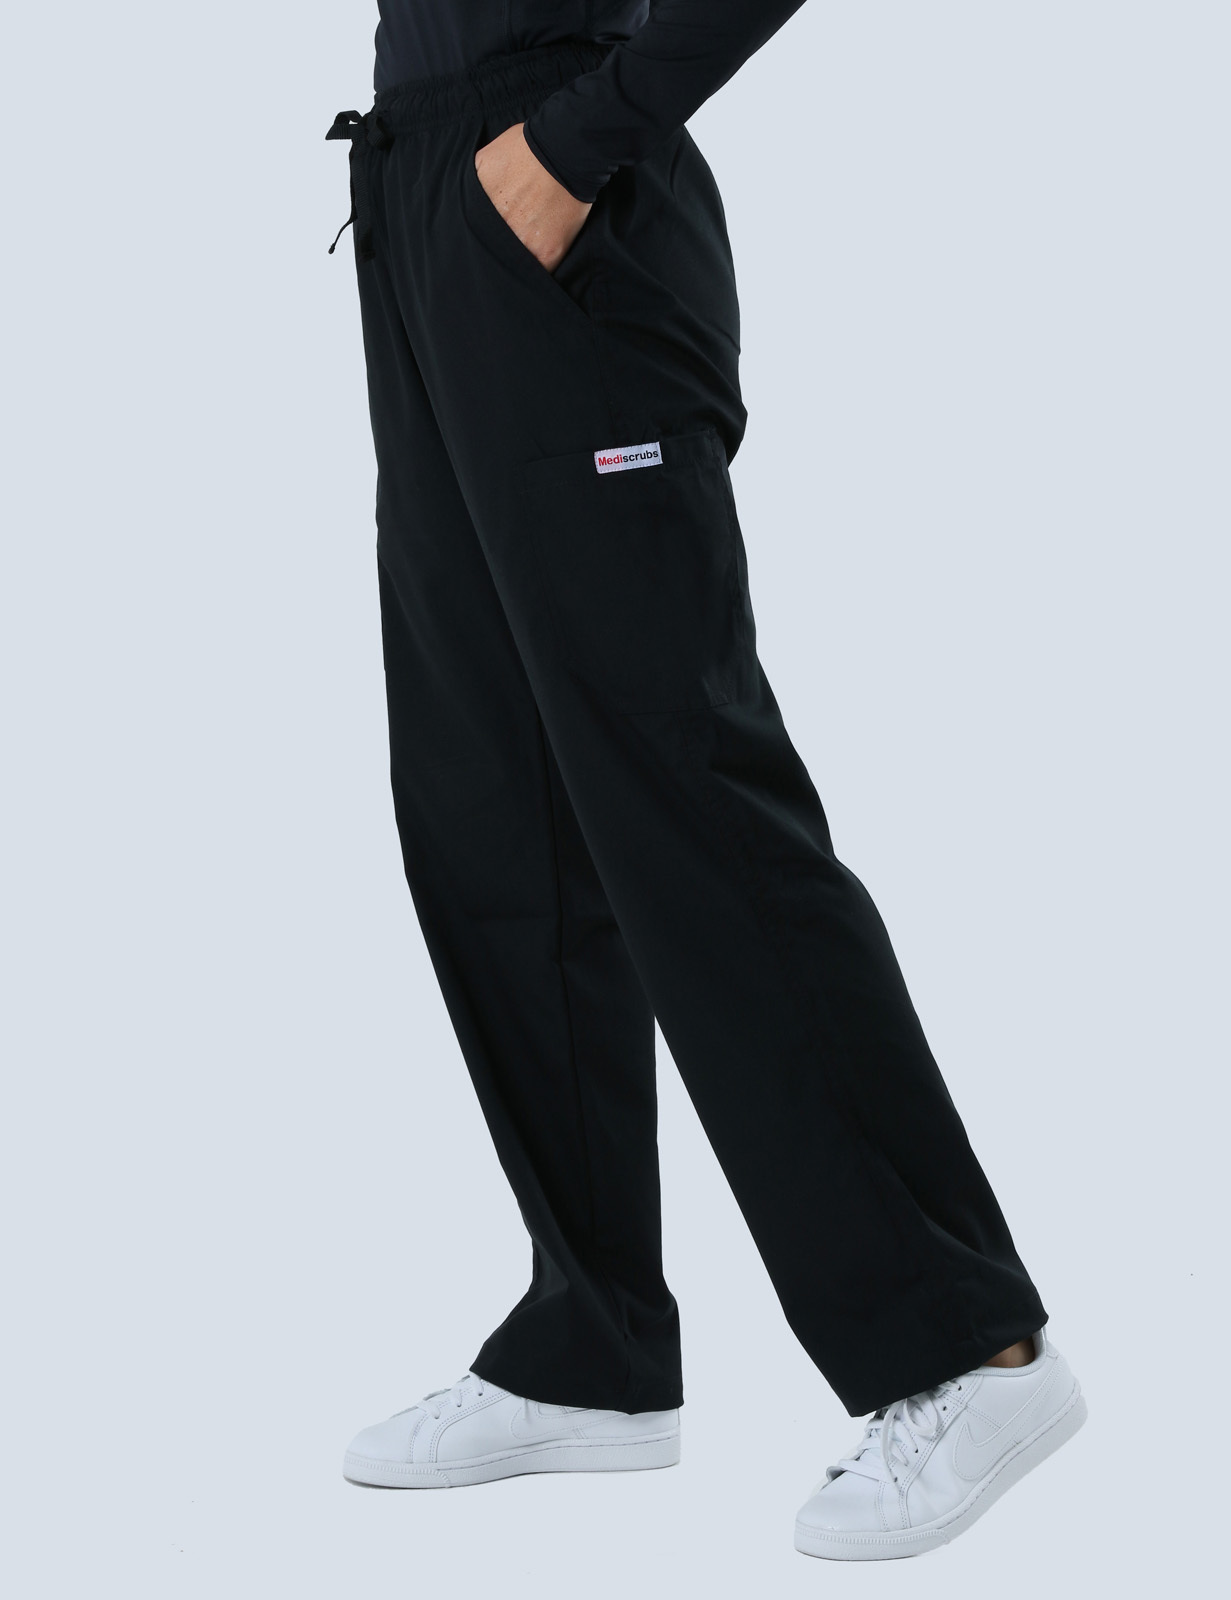 Canberra Hospital - Doctors (4 Pocket Scrub Top and Cargo Pants in Black incl Logos)